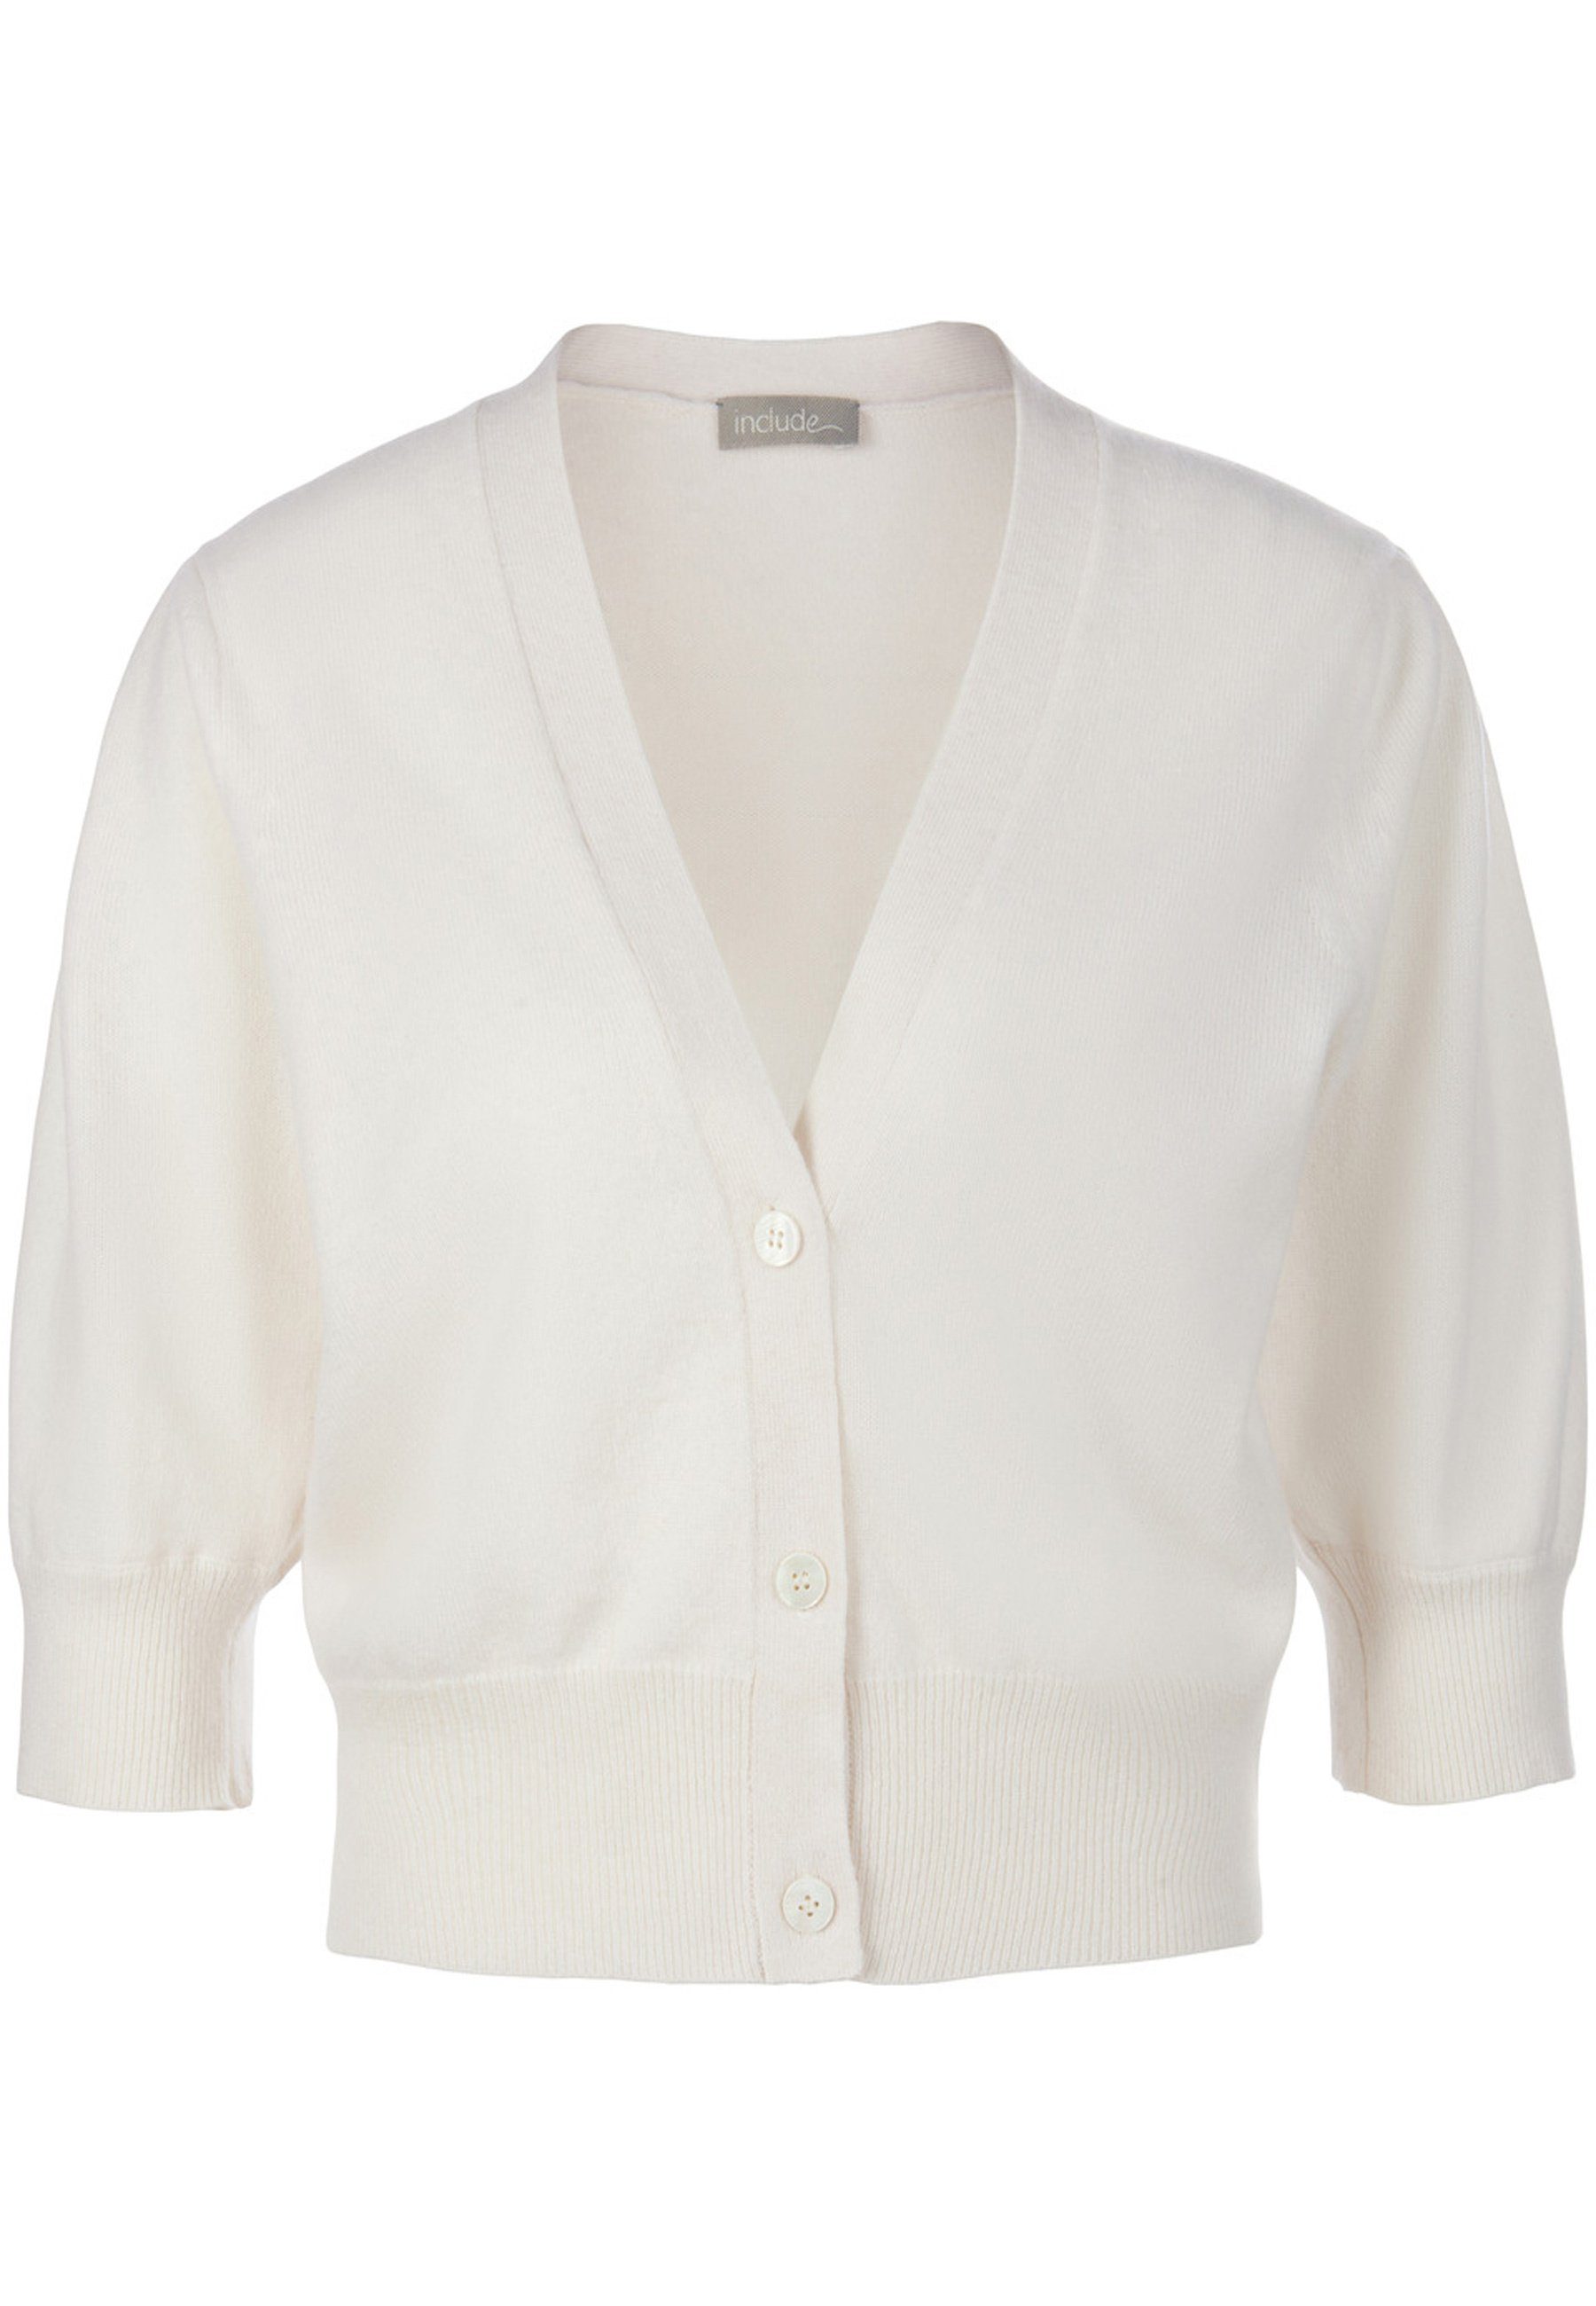 Cardigan wollweiss include Cashmere